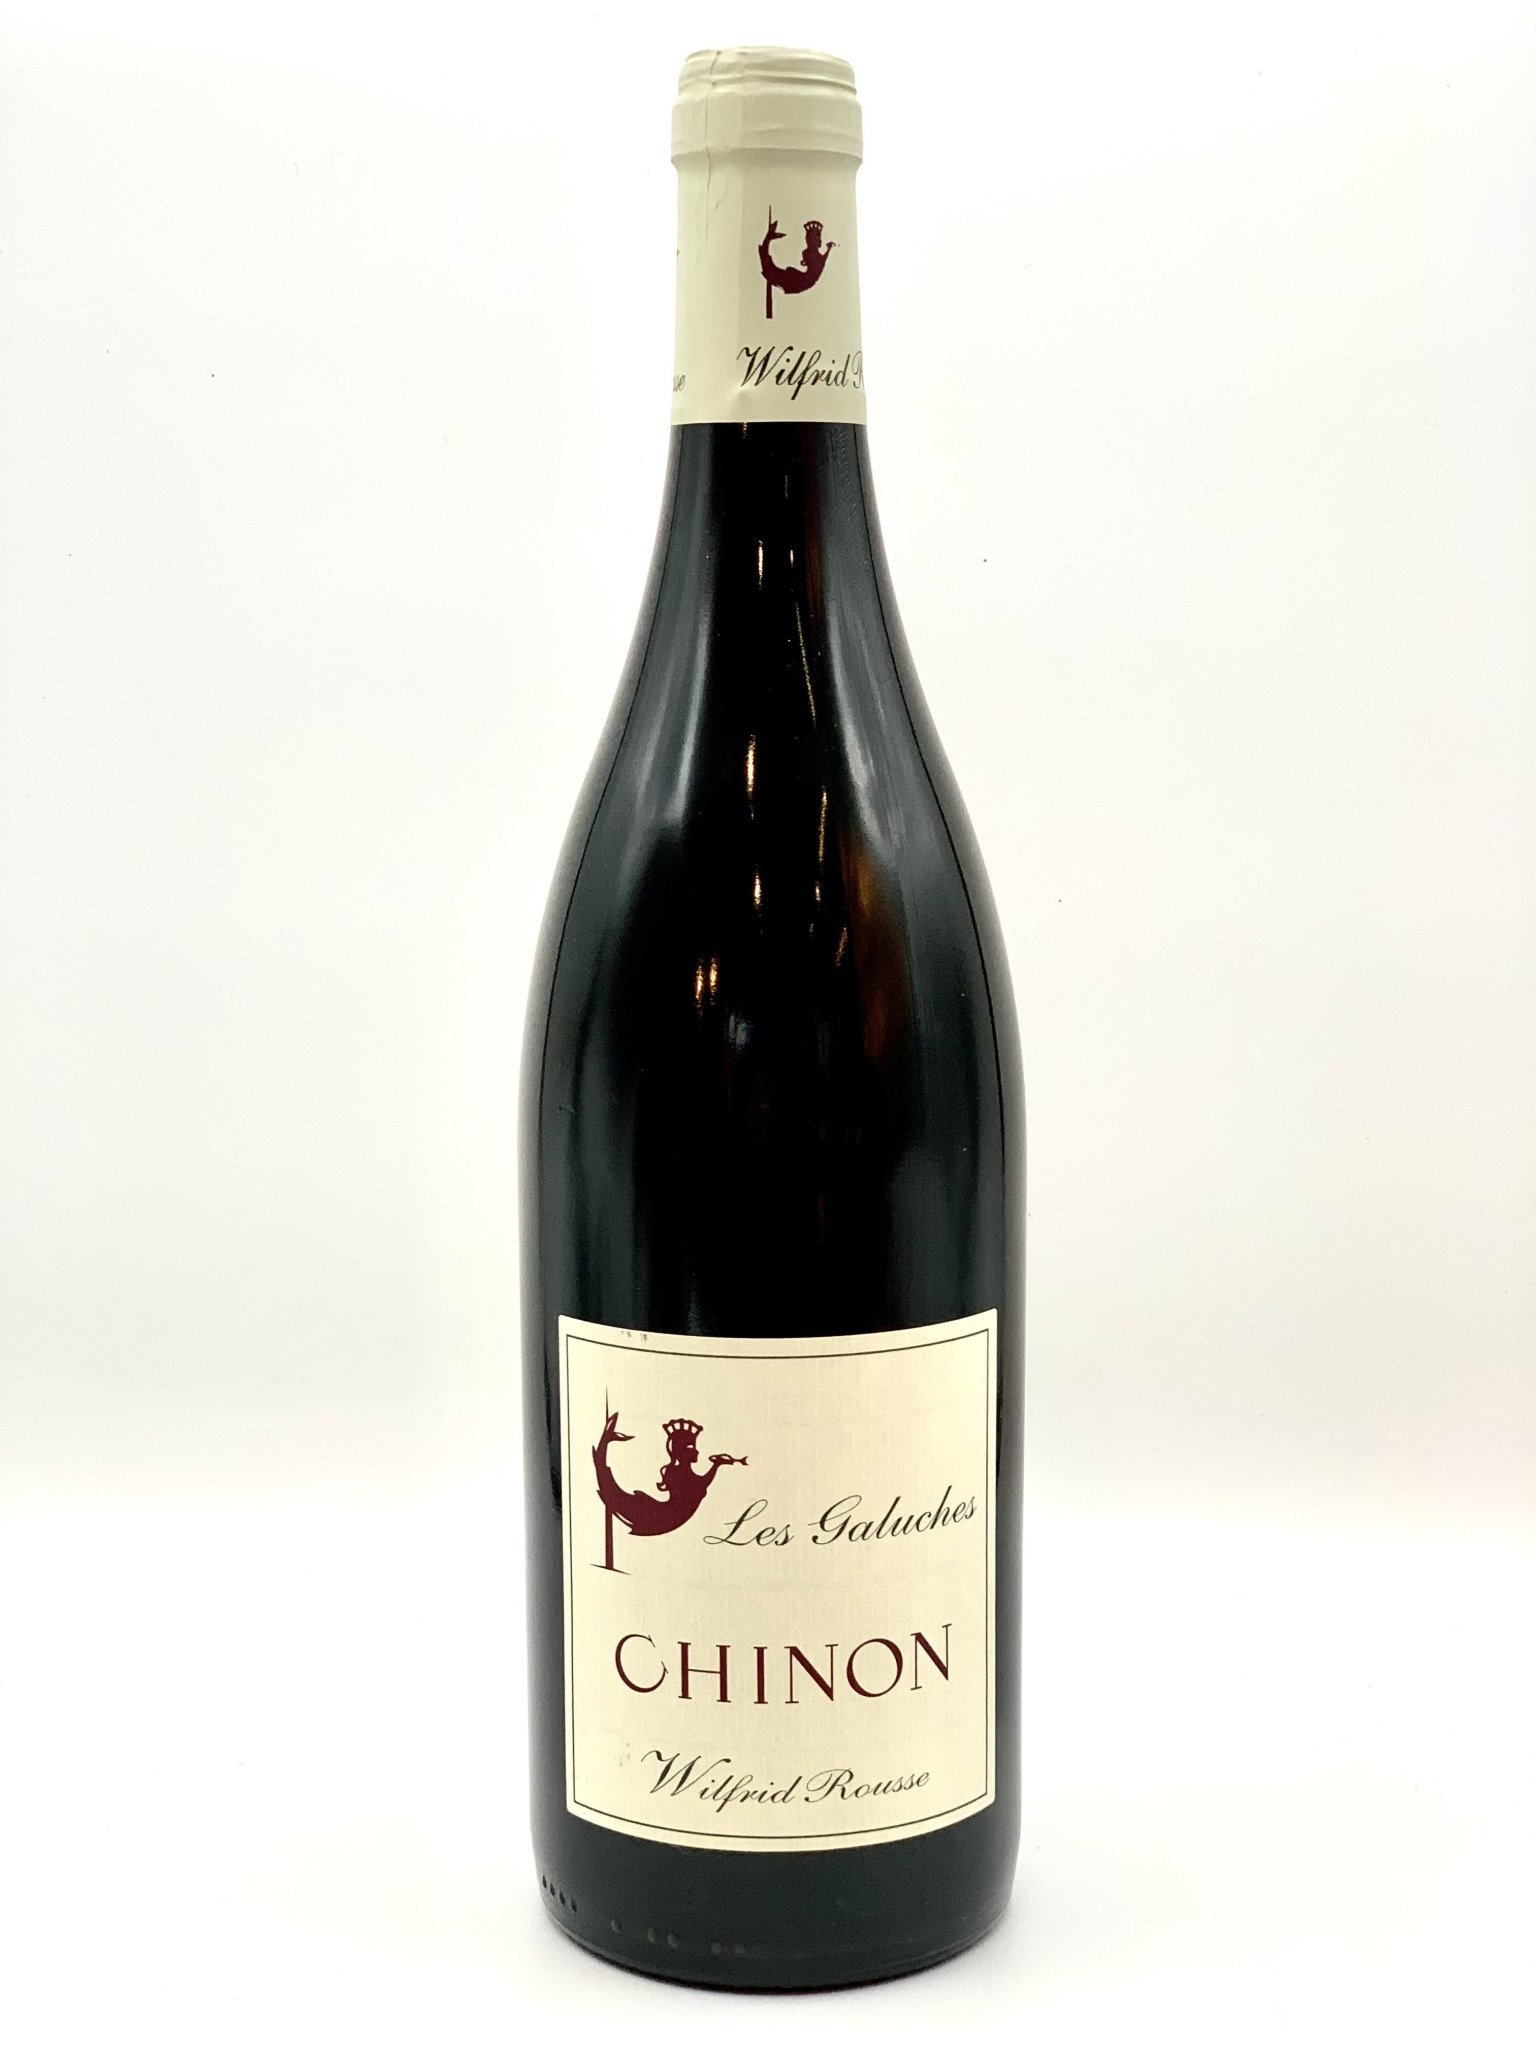 Chinon "Les Galuches" 2021 Domaine Wilfrid Rousse 750ml